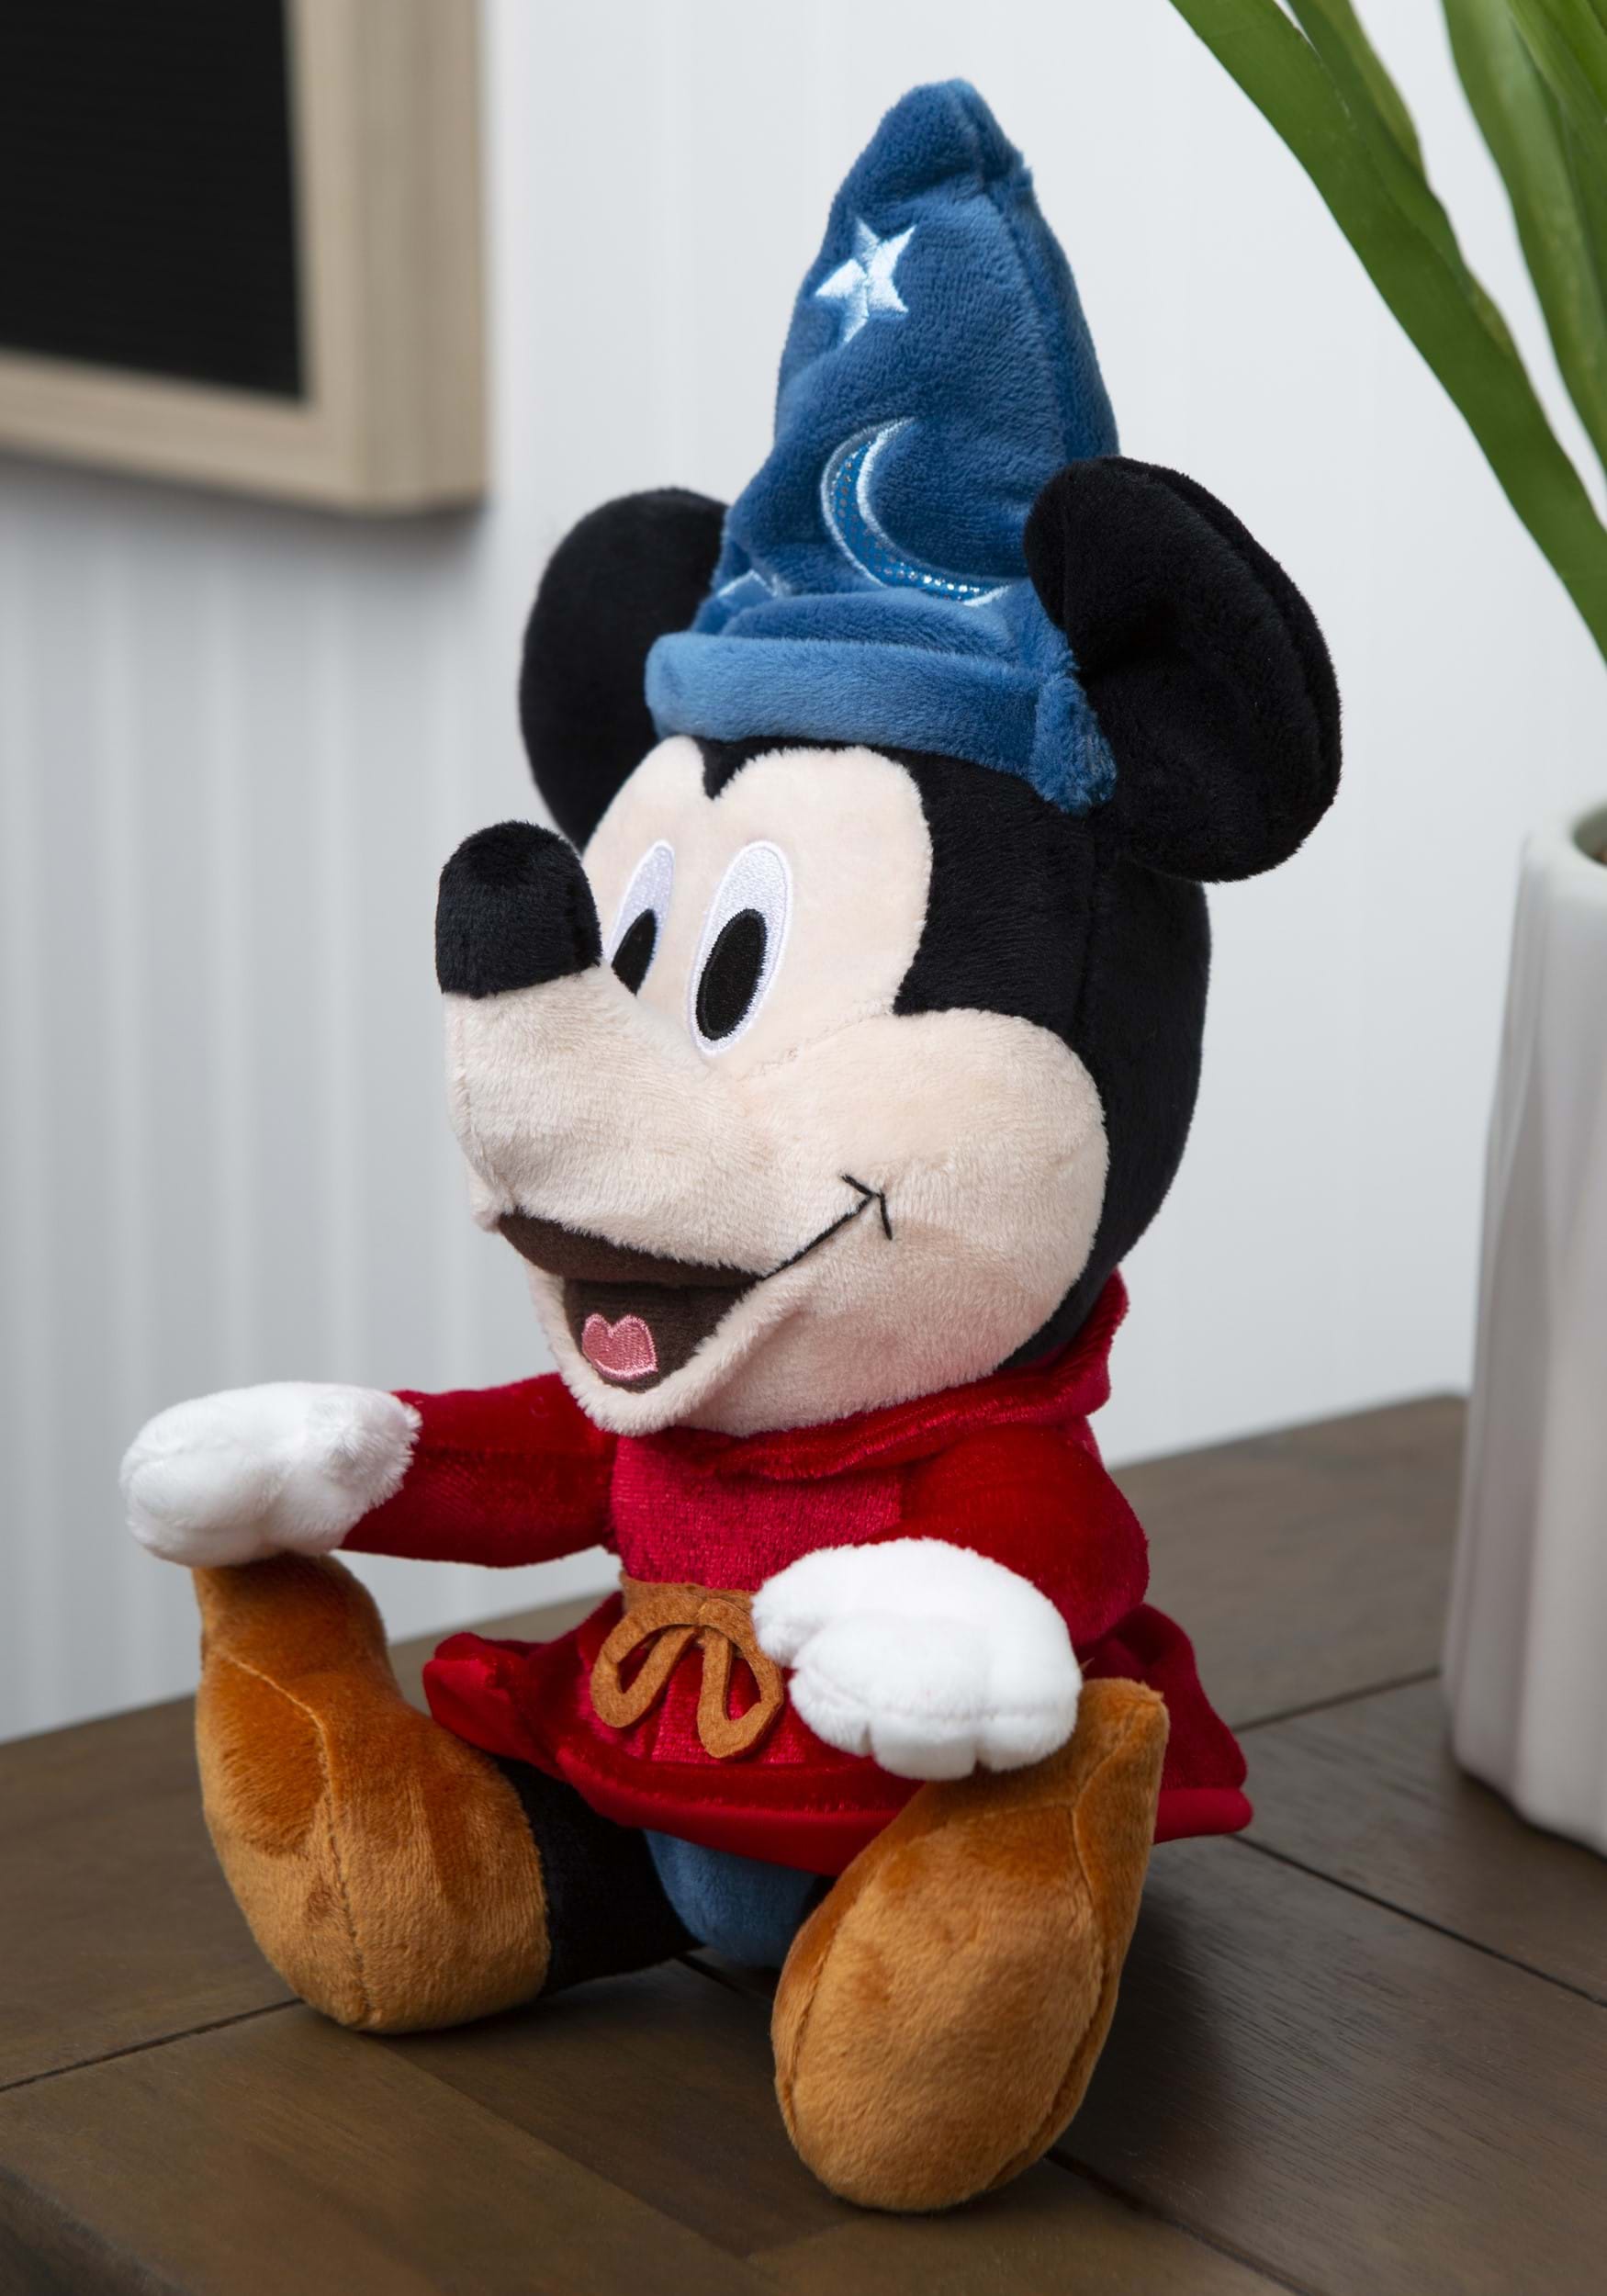 Official Disney Fantasia Sorcerer Mickey Mouse Soft Plush Stuffed Toy Animal 